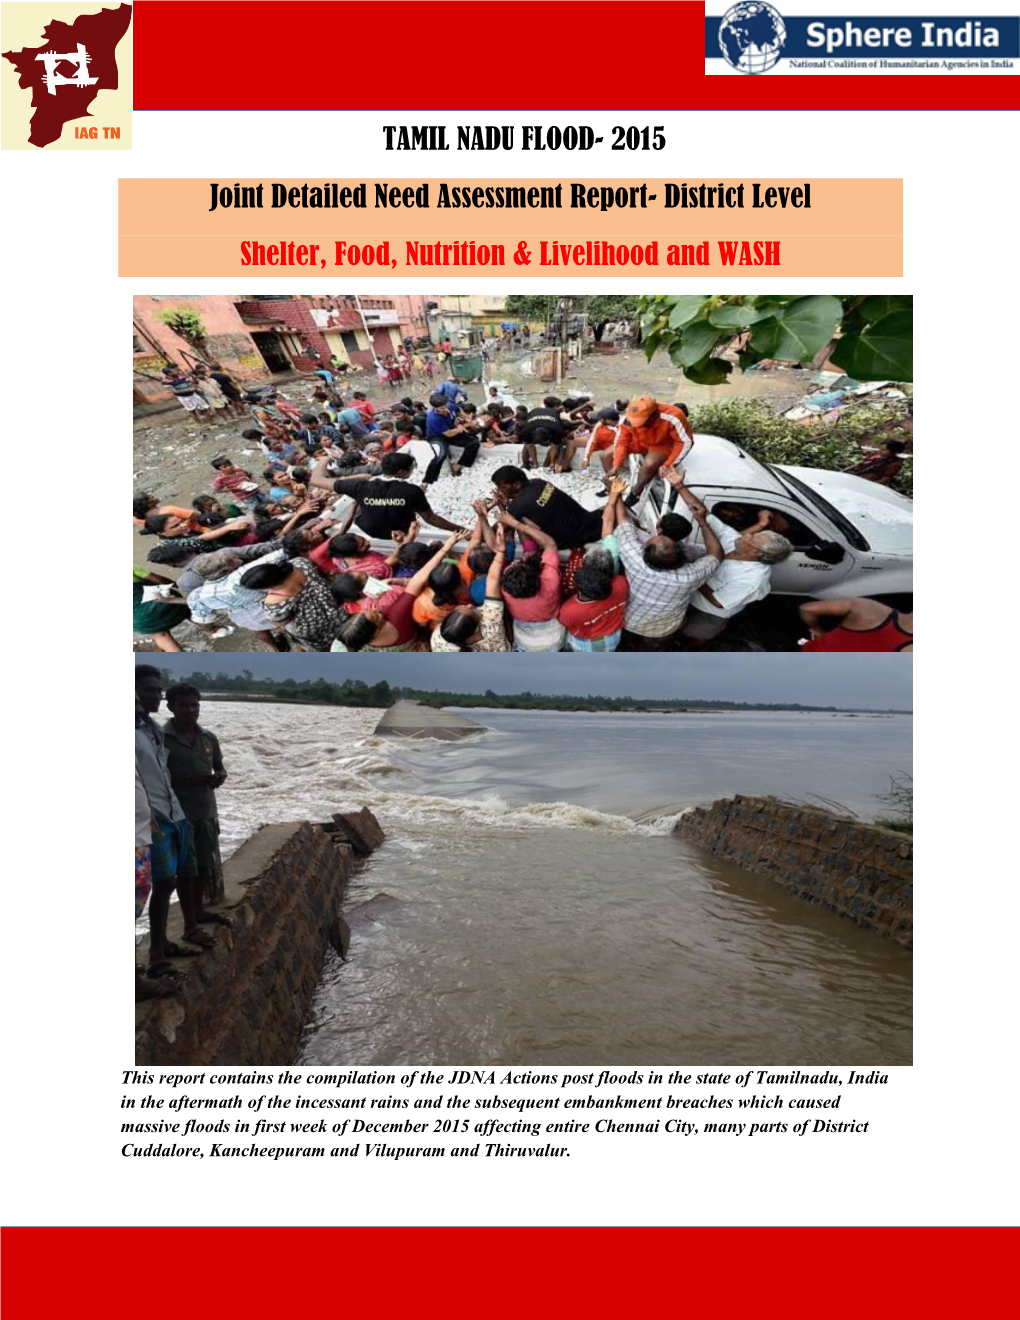 TAMIL NADU FLOOD- 2015 Joint Detailed Need Assessment Report- District Level